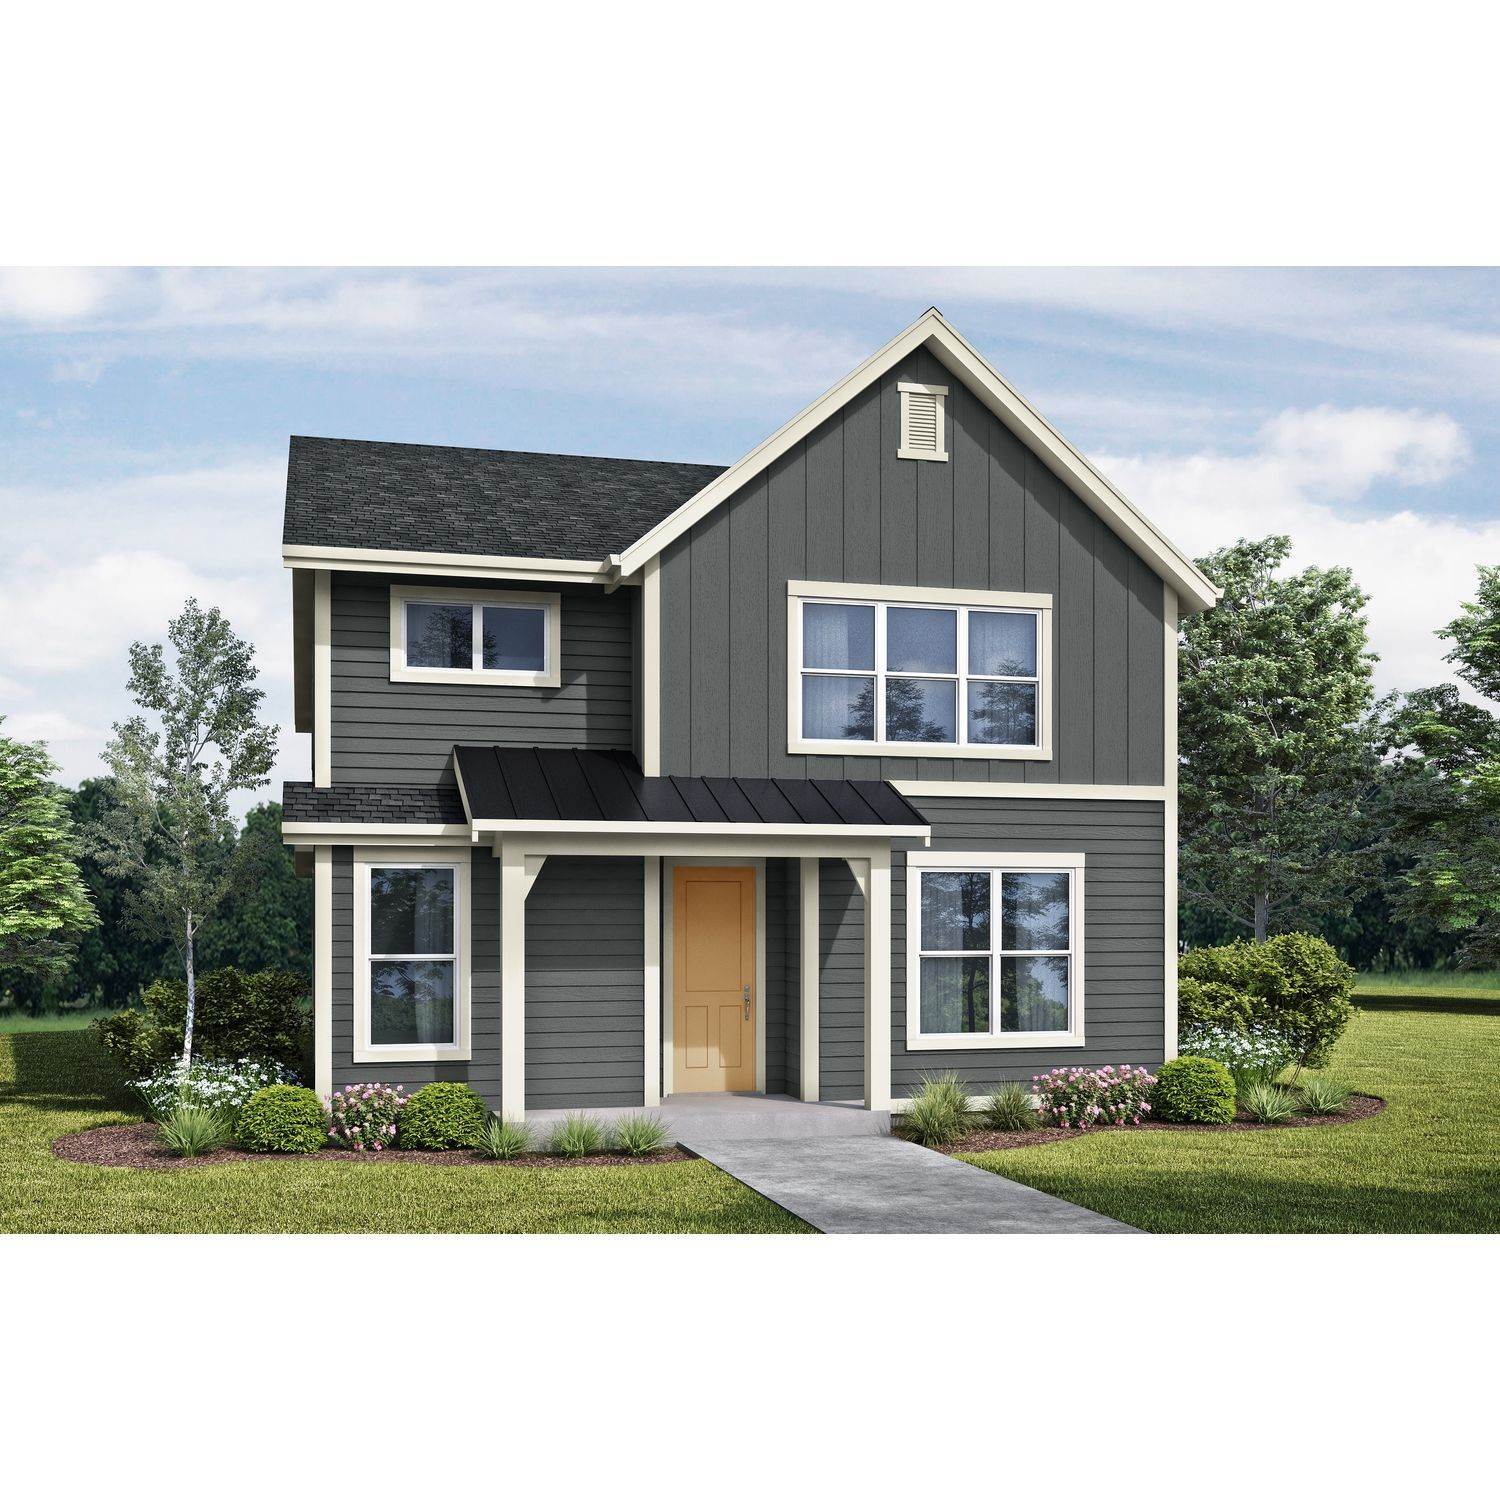 Single Family for Sale at Hillsboro, OR 97123